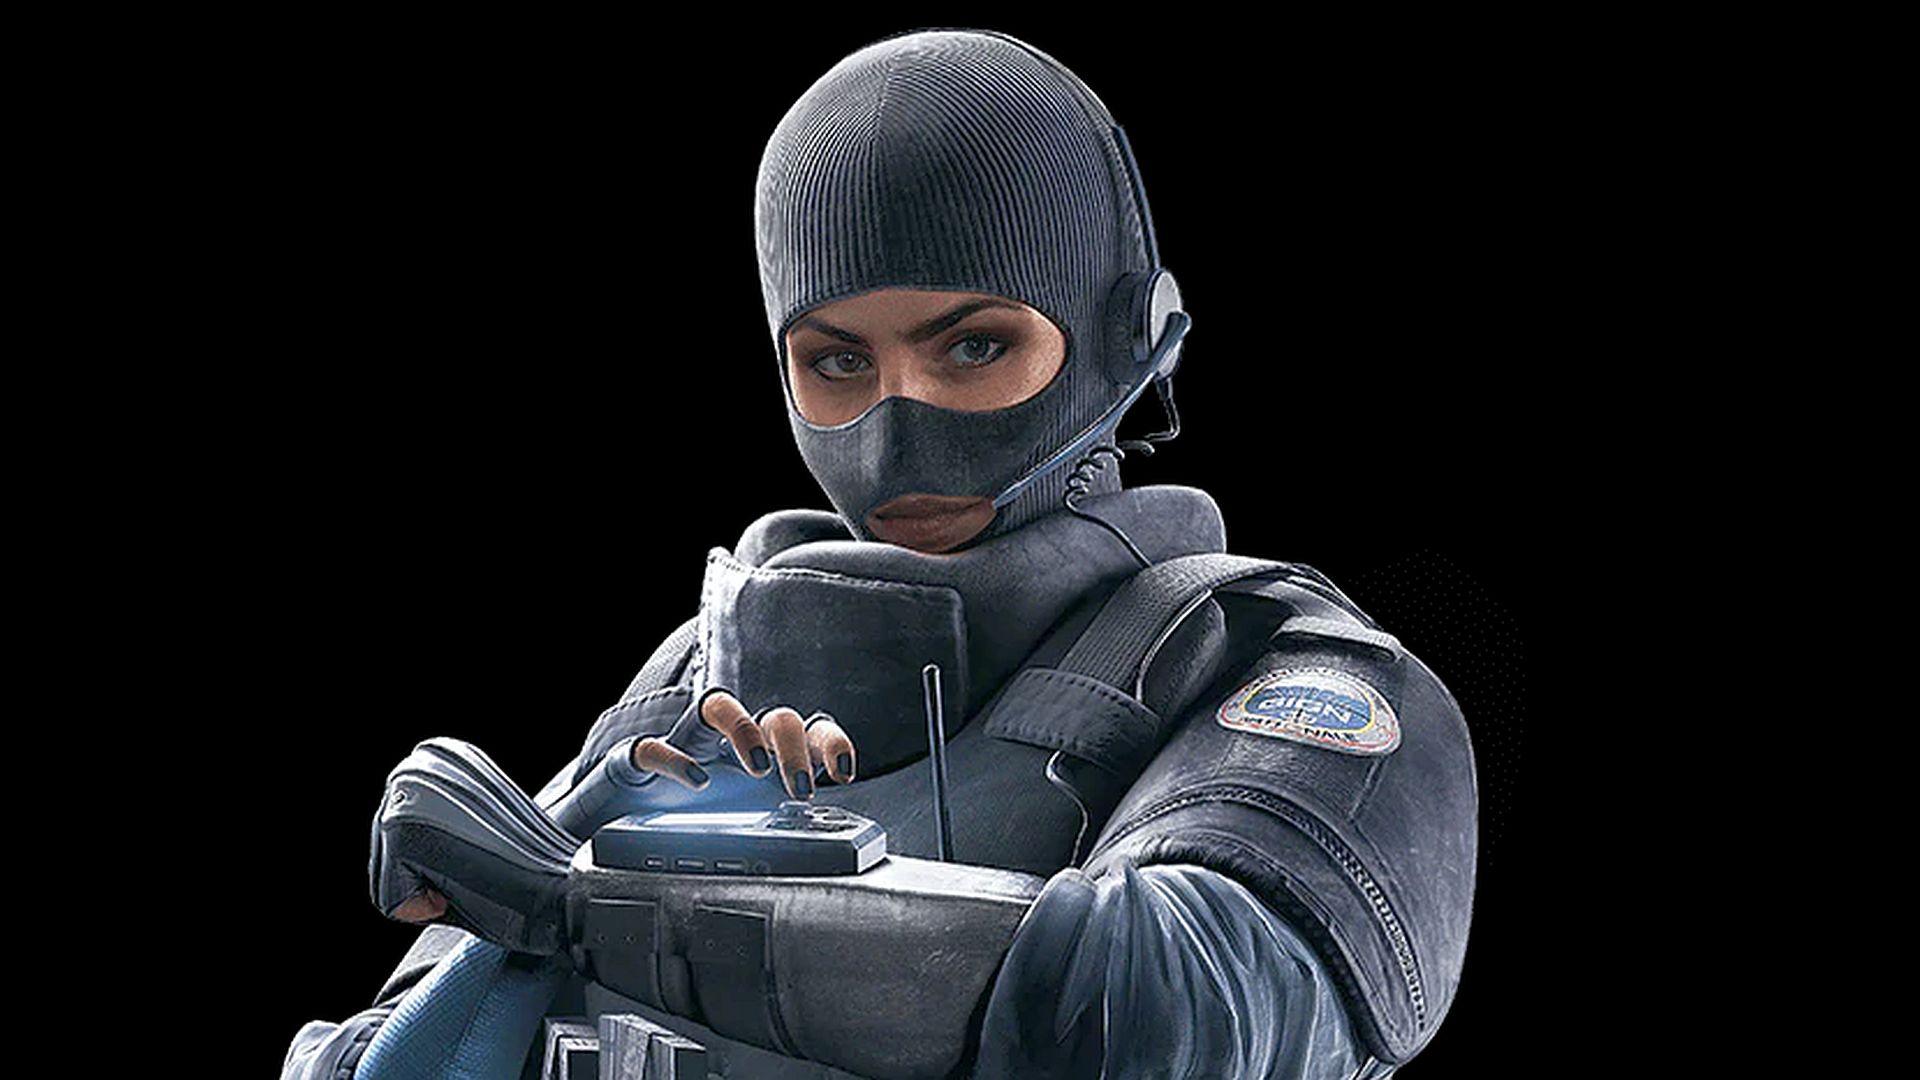 Rainbow Six Siege Year 5s gadget changes could redefine 